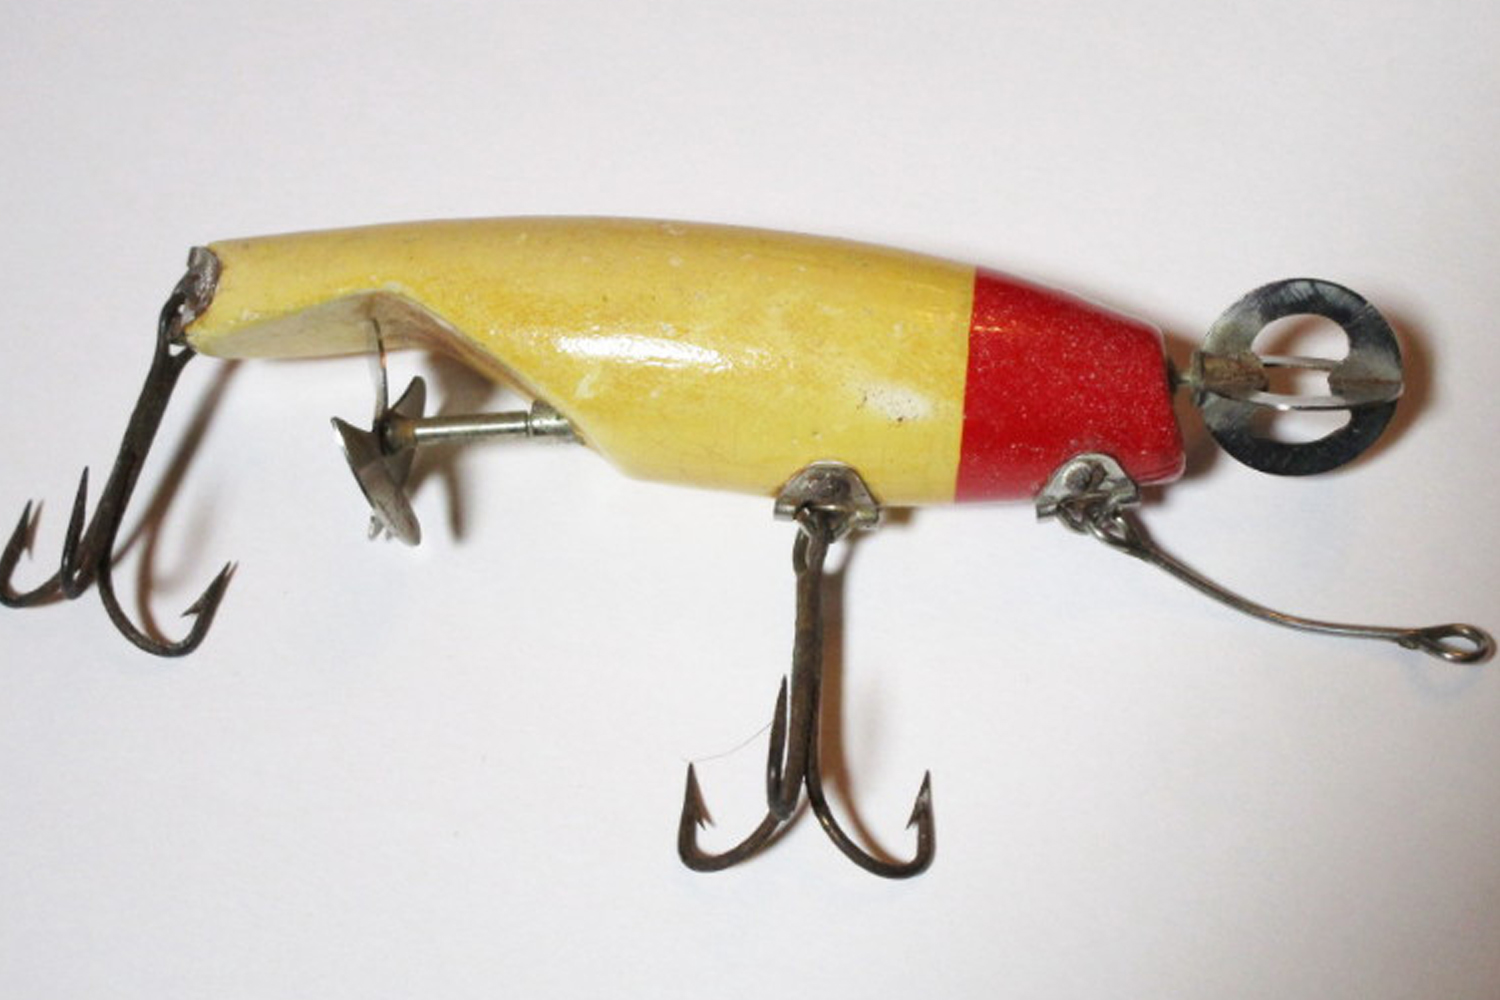 Encyclopedia of Old Fishing Lures : Made in North America